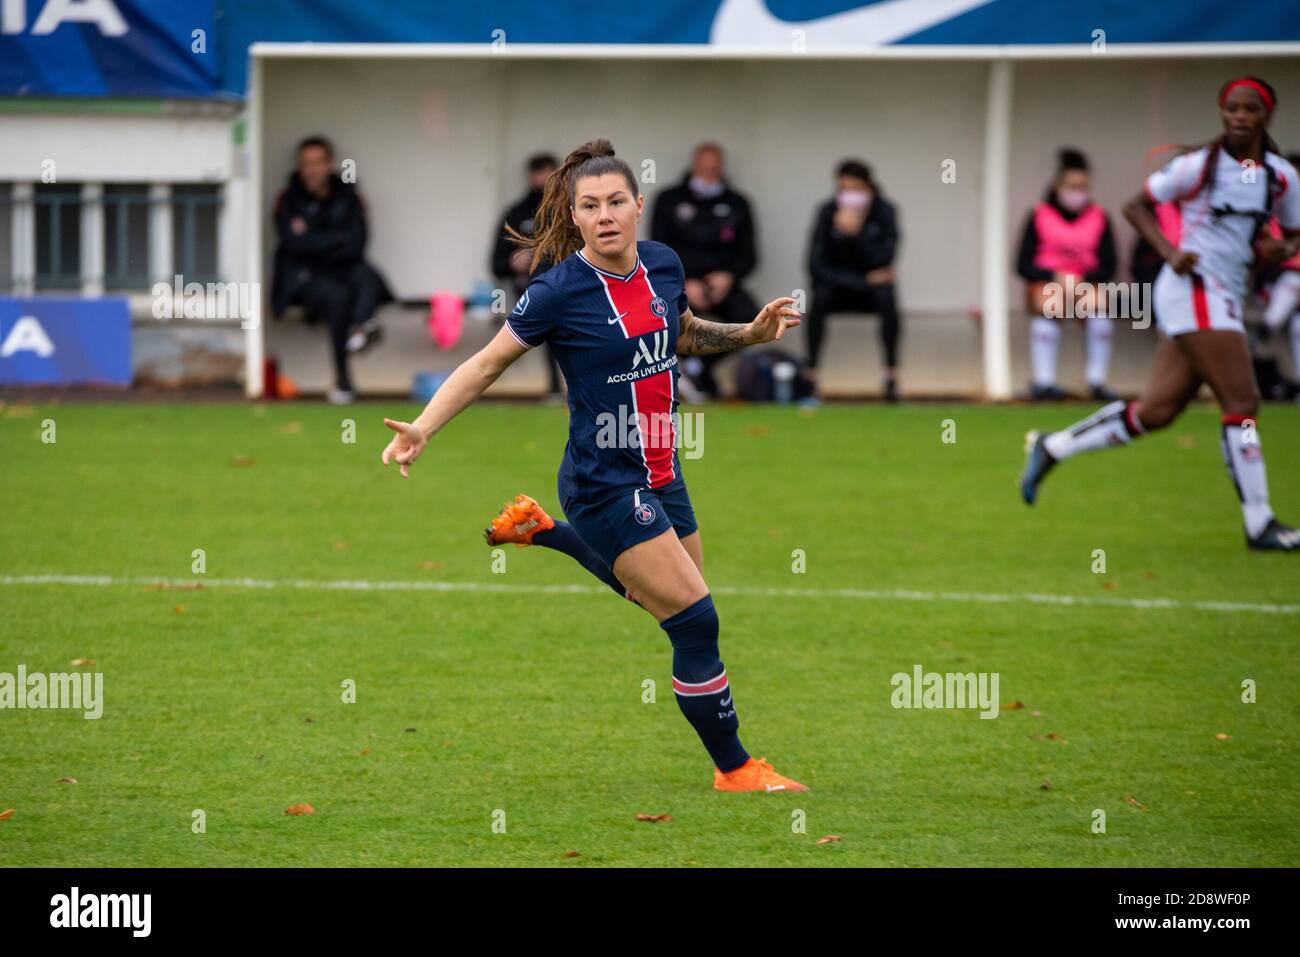 Ramona Bachmann of Paris Saint Germain during the Women's French championship D1 Arkema football match between Paris Saint-Germain and FC Fleury 91 on November 1, 2020 at Georges Lef.vre stadium in Saint-Germain-en-Laye, France - Photo Antoine Massinon / A2M Sport Consulting / DPPI Credit: LM/DPPI/Antoine Massinon/Alamy Live News Stock Photo